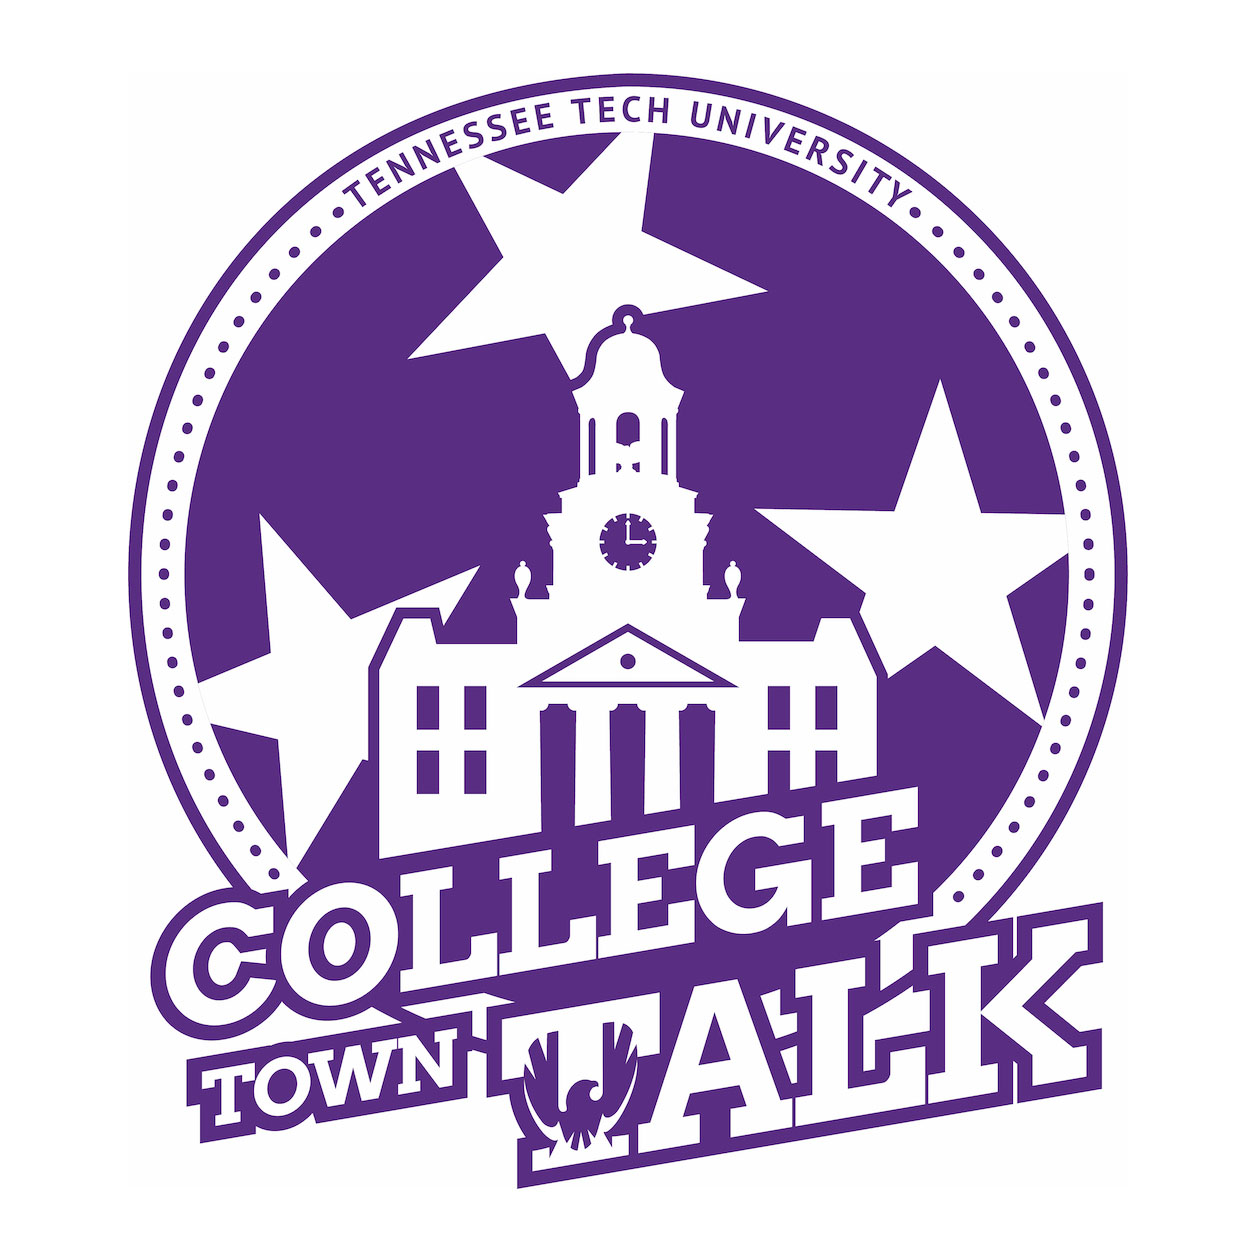 The logo for College Town Talk pays tribute to Tech’s Derryberry Hall and the Tennessee tri-star symbol. 